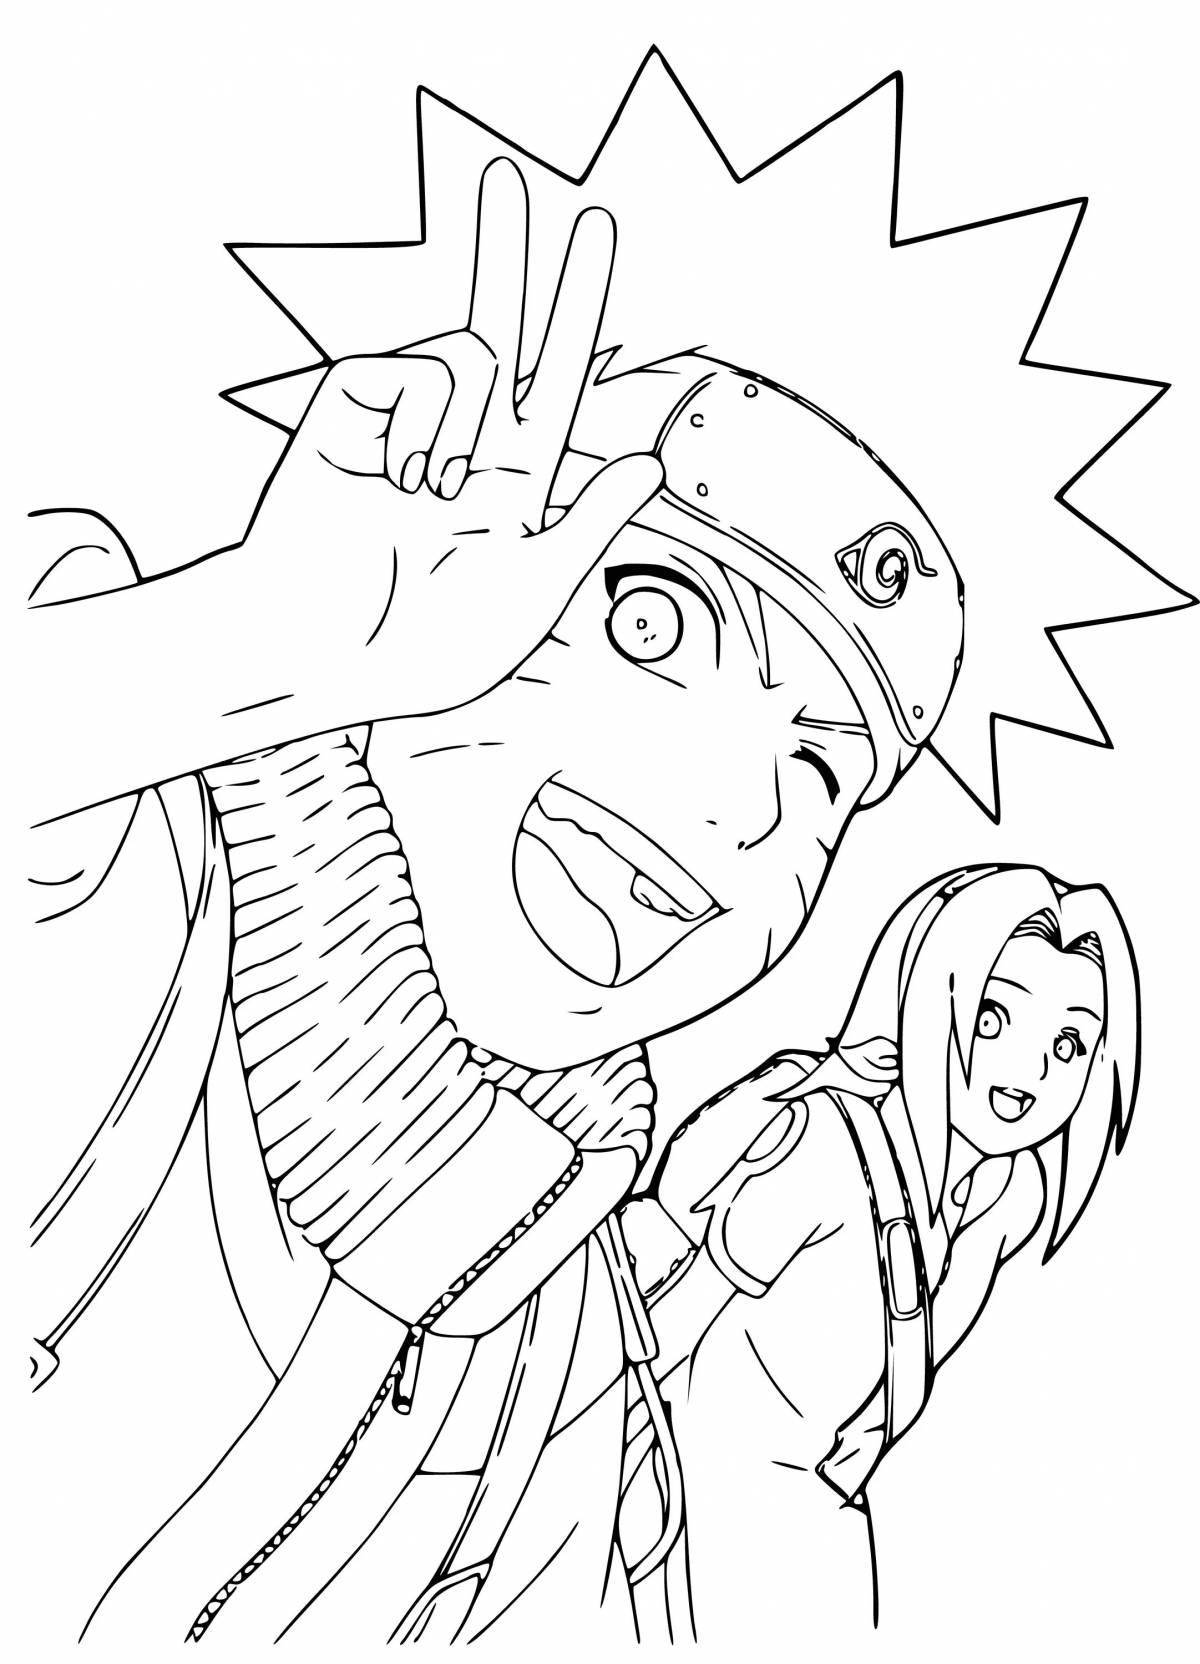 Naruto glitter coloring book for girls